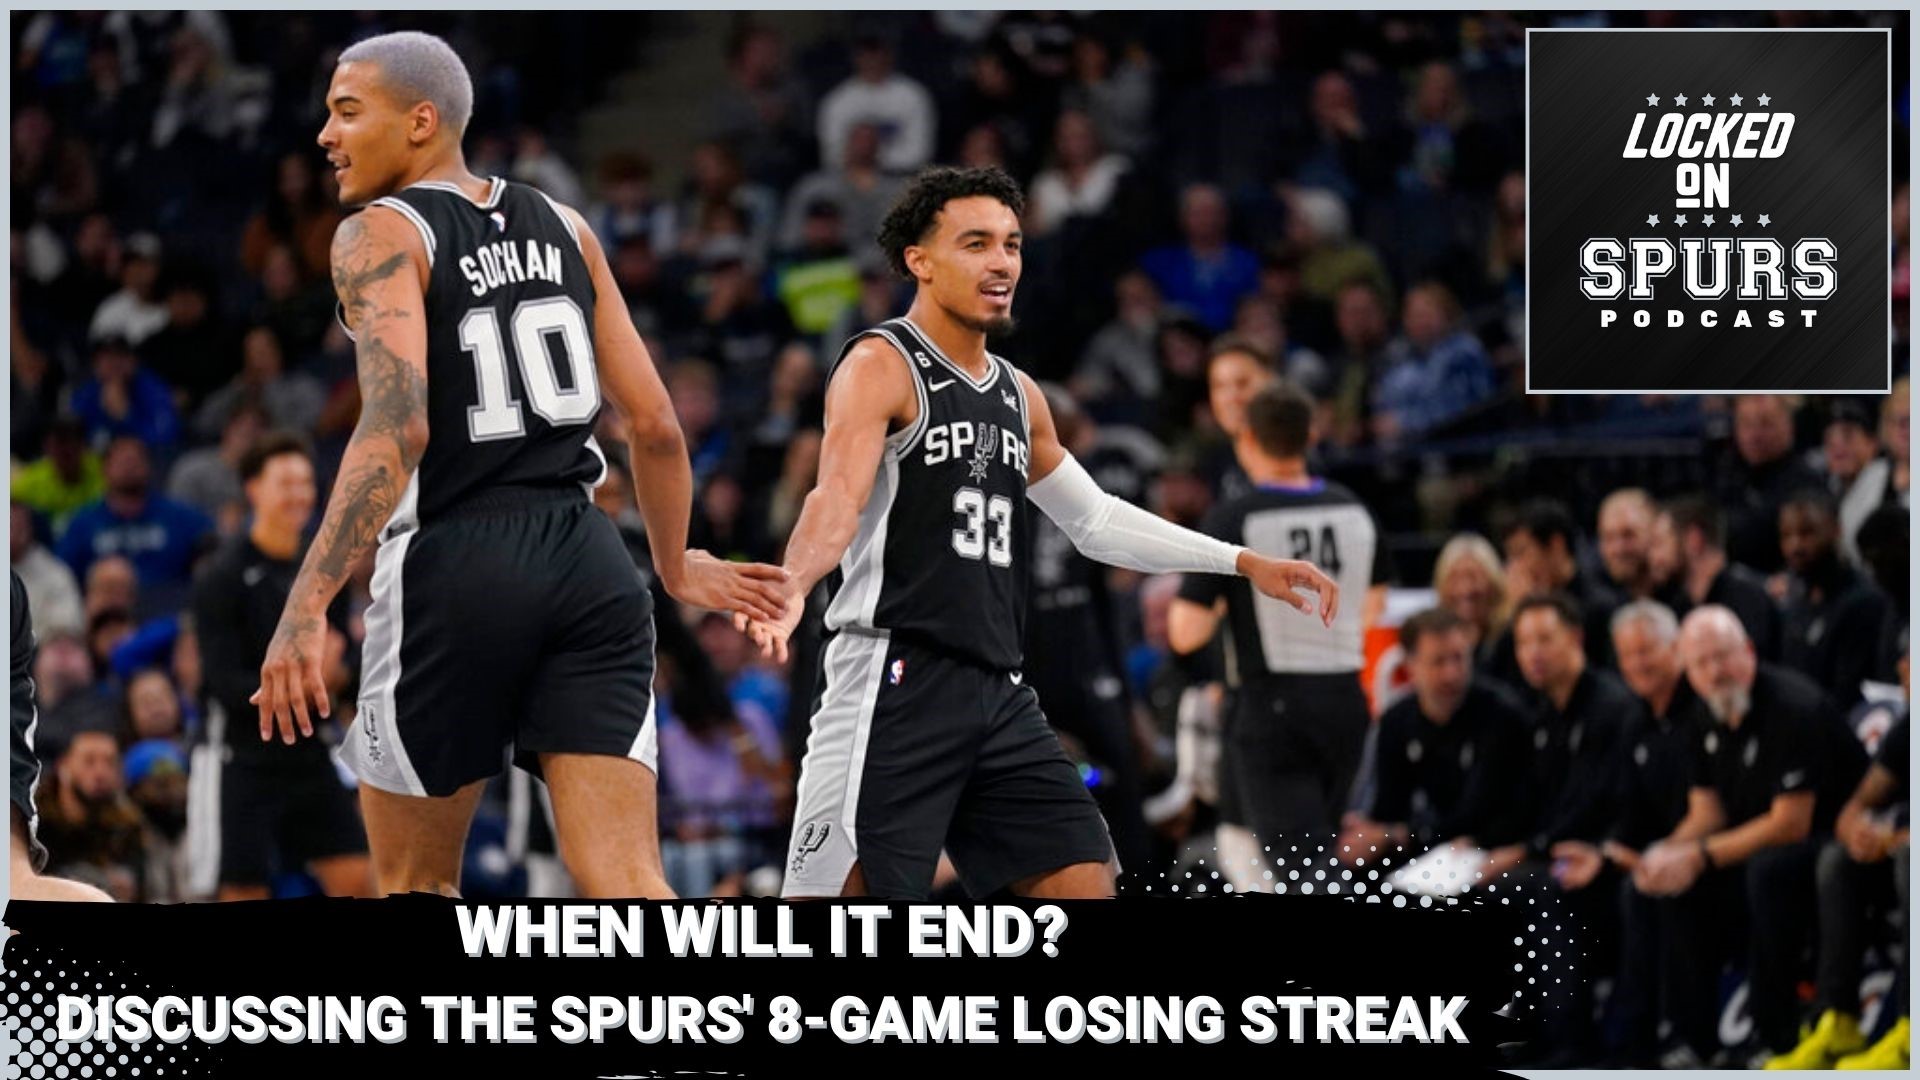 The Spurs are on their longest losing streak of the season.